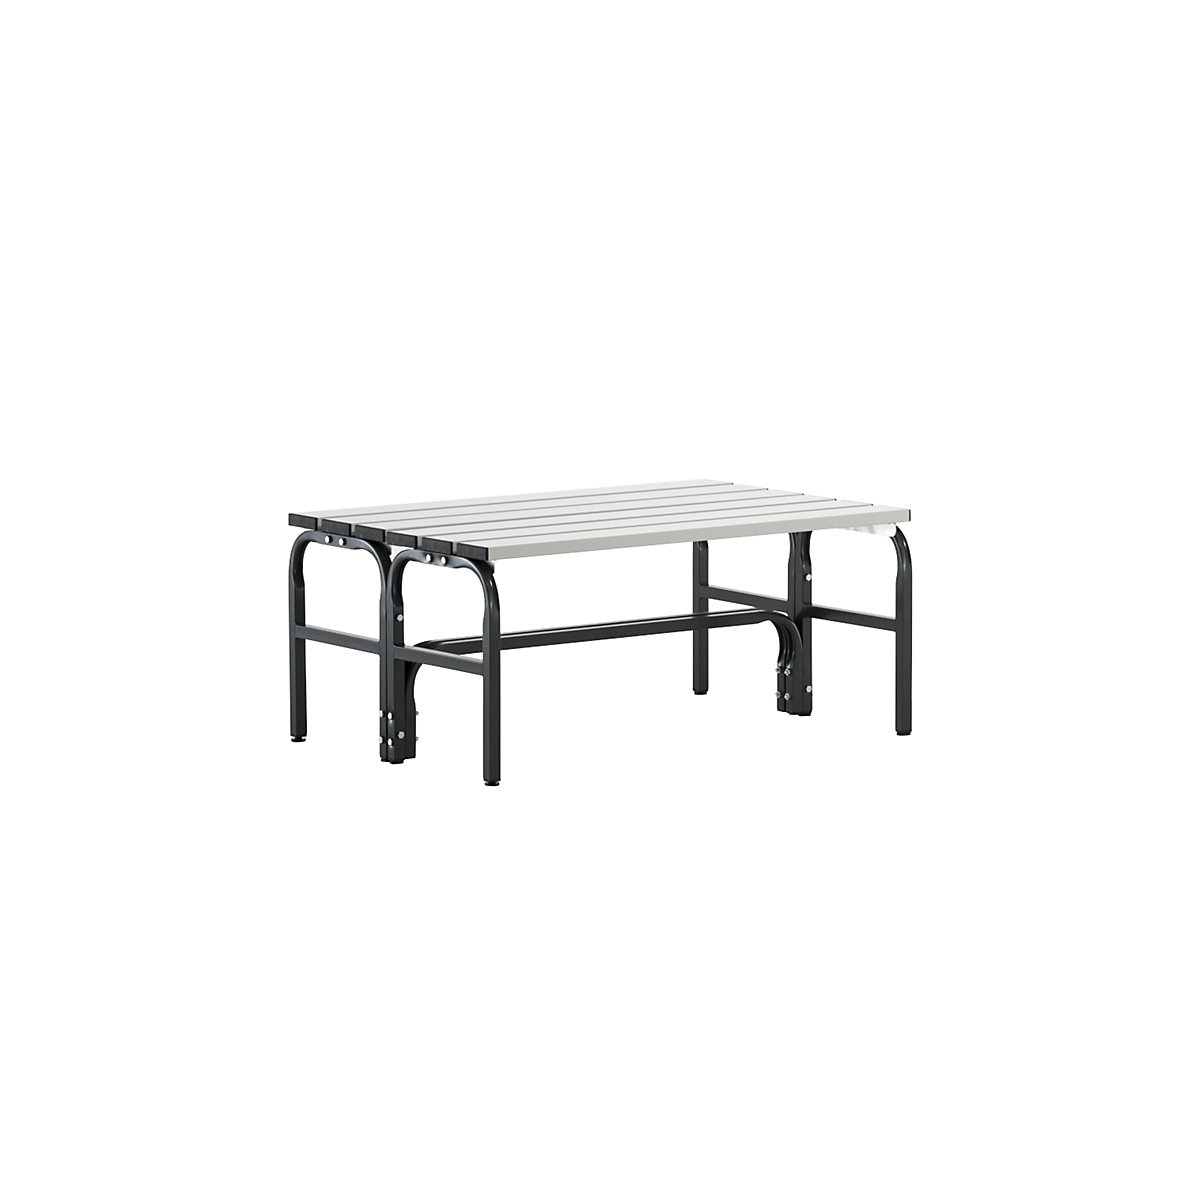 Cloakroom bench, double sided - Sypro